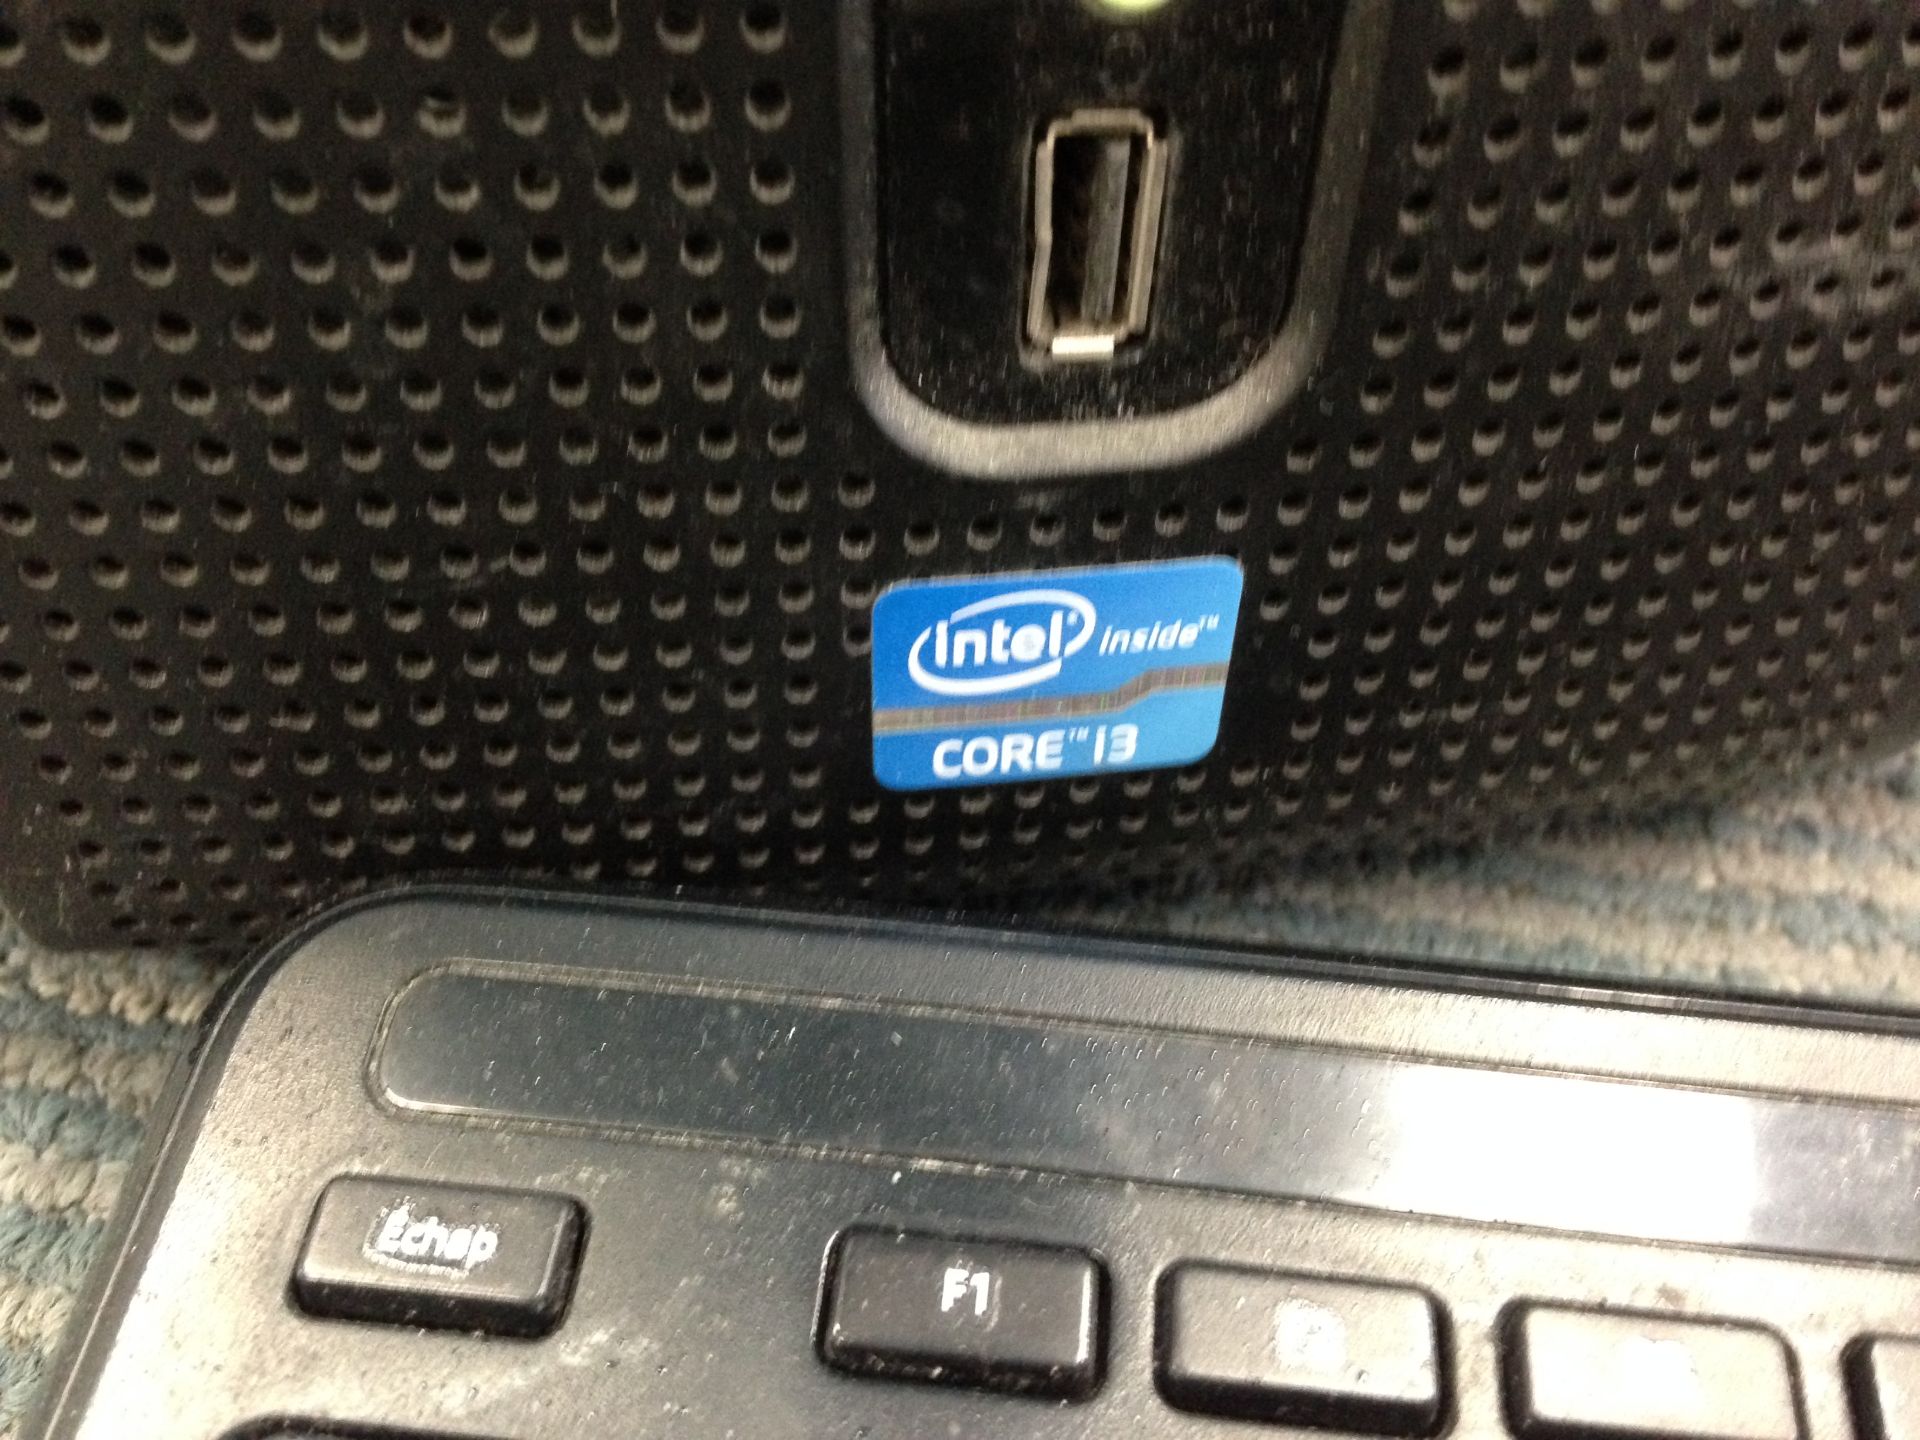 INTEL INSIDE CORE I3 WITH SCREEN KEYBOARD MOUSE - Image 4 of 4